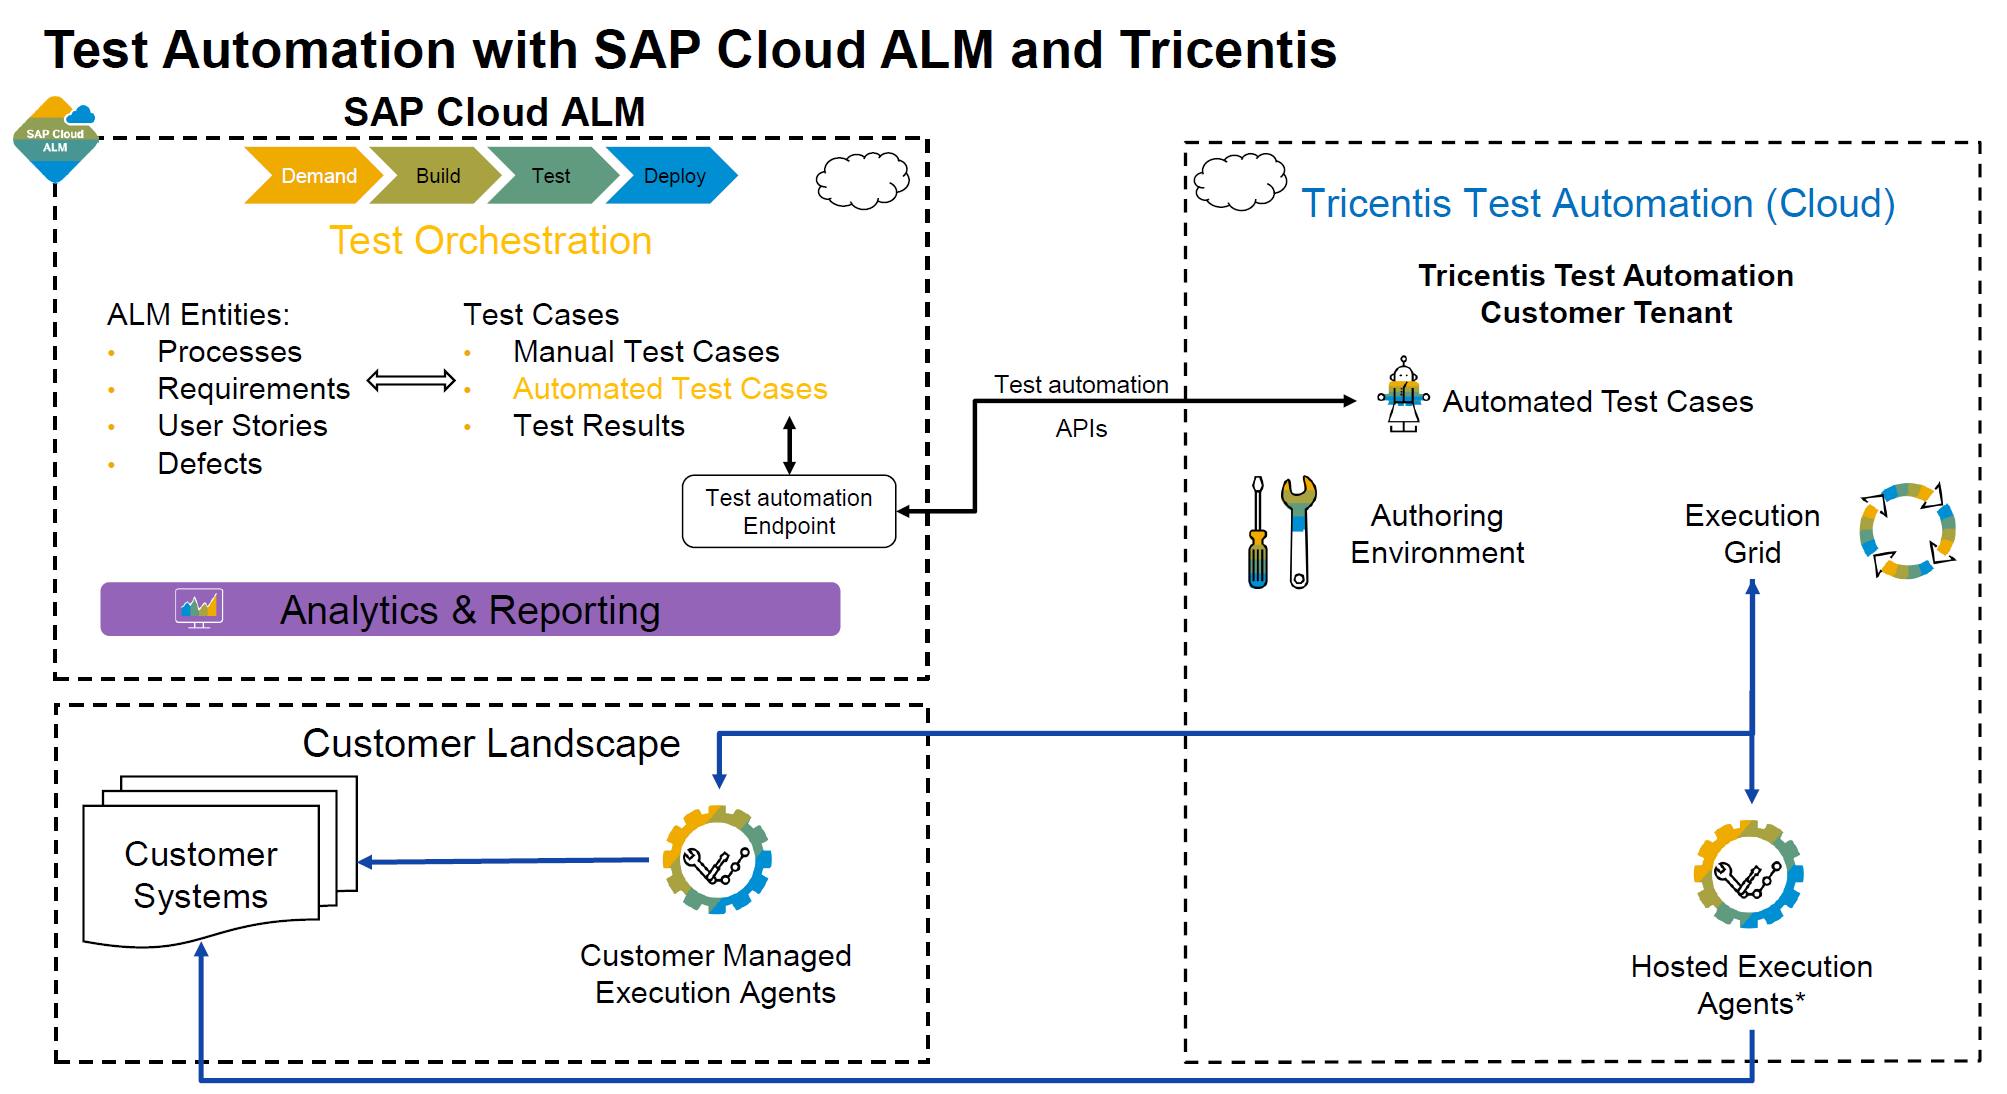 Test Automation with SAP Cloud ALM and Tricentis flowchart